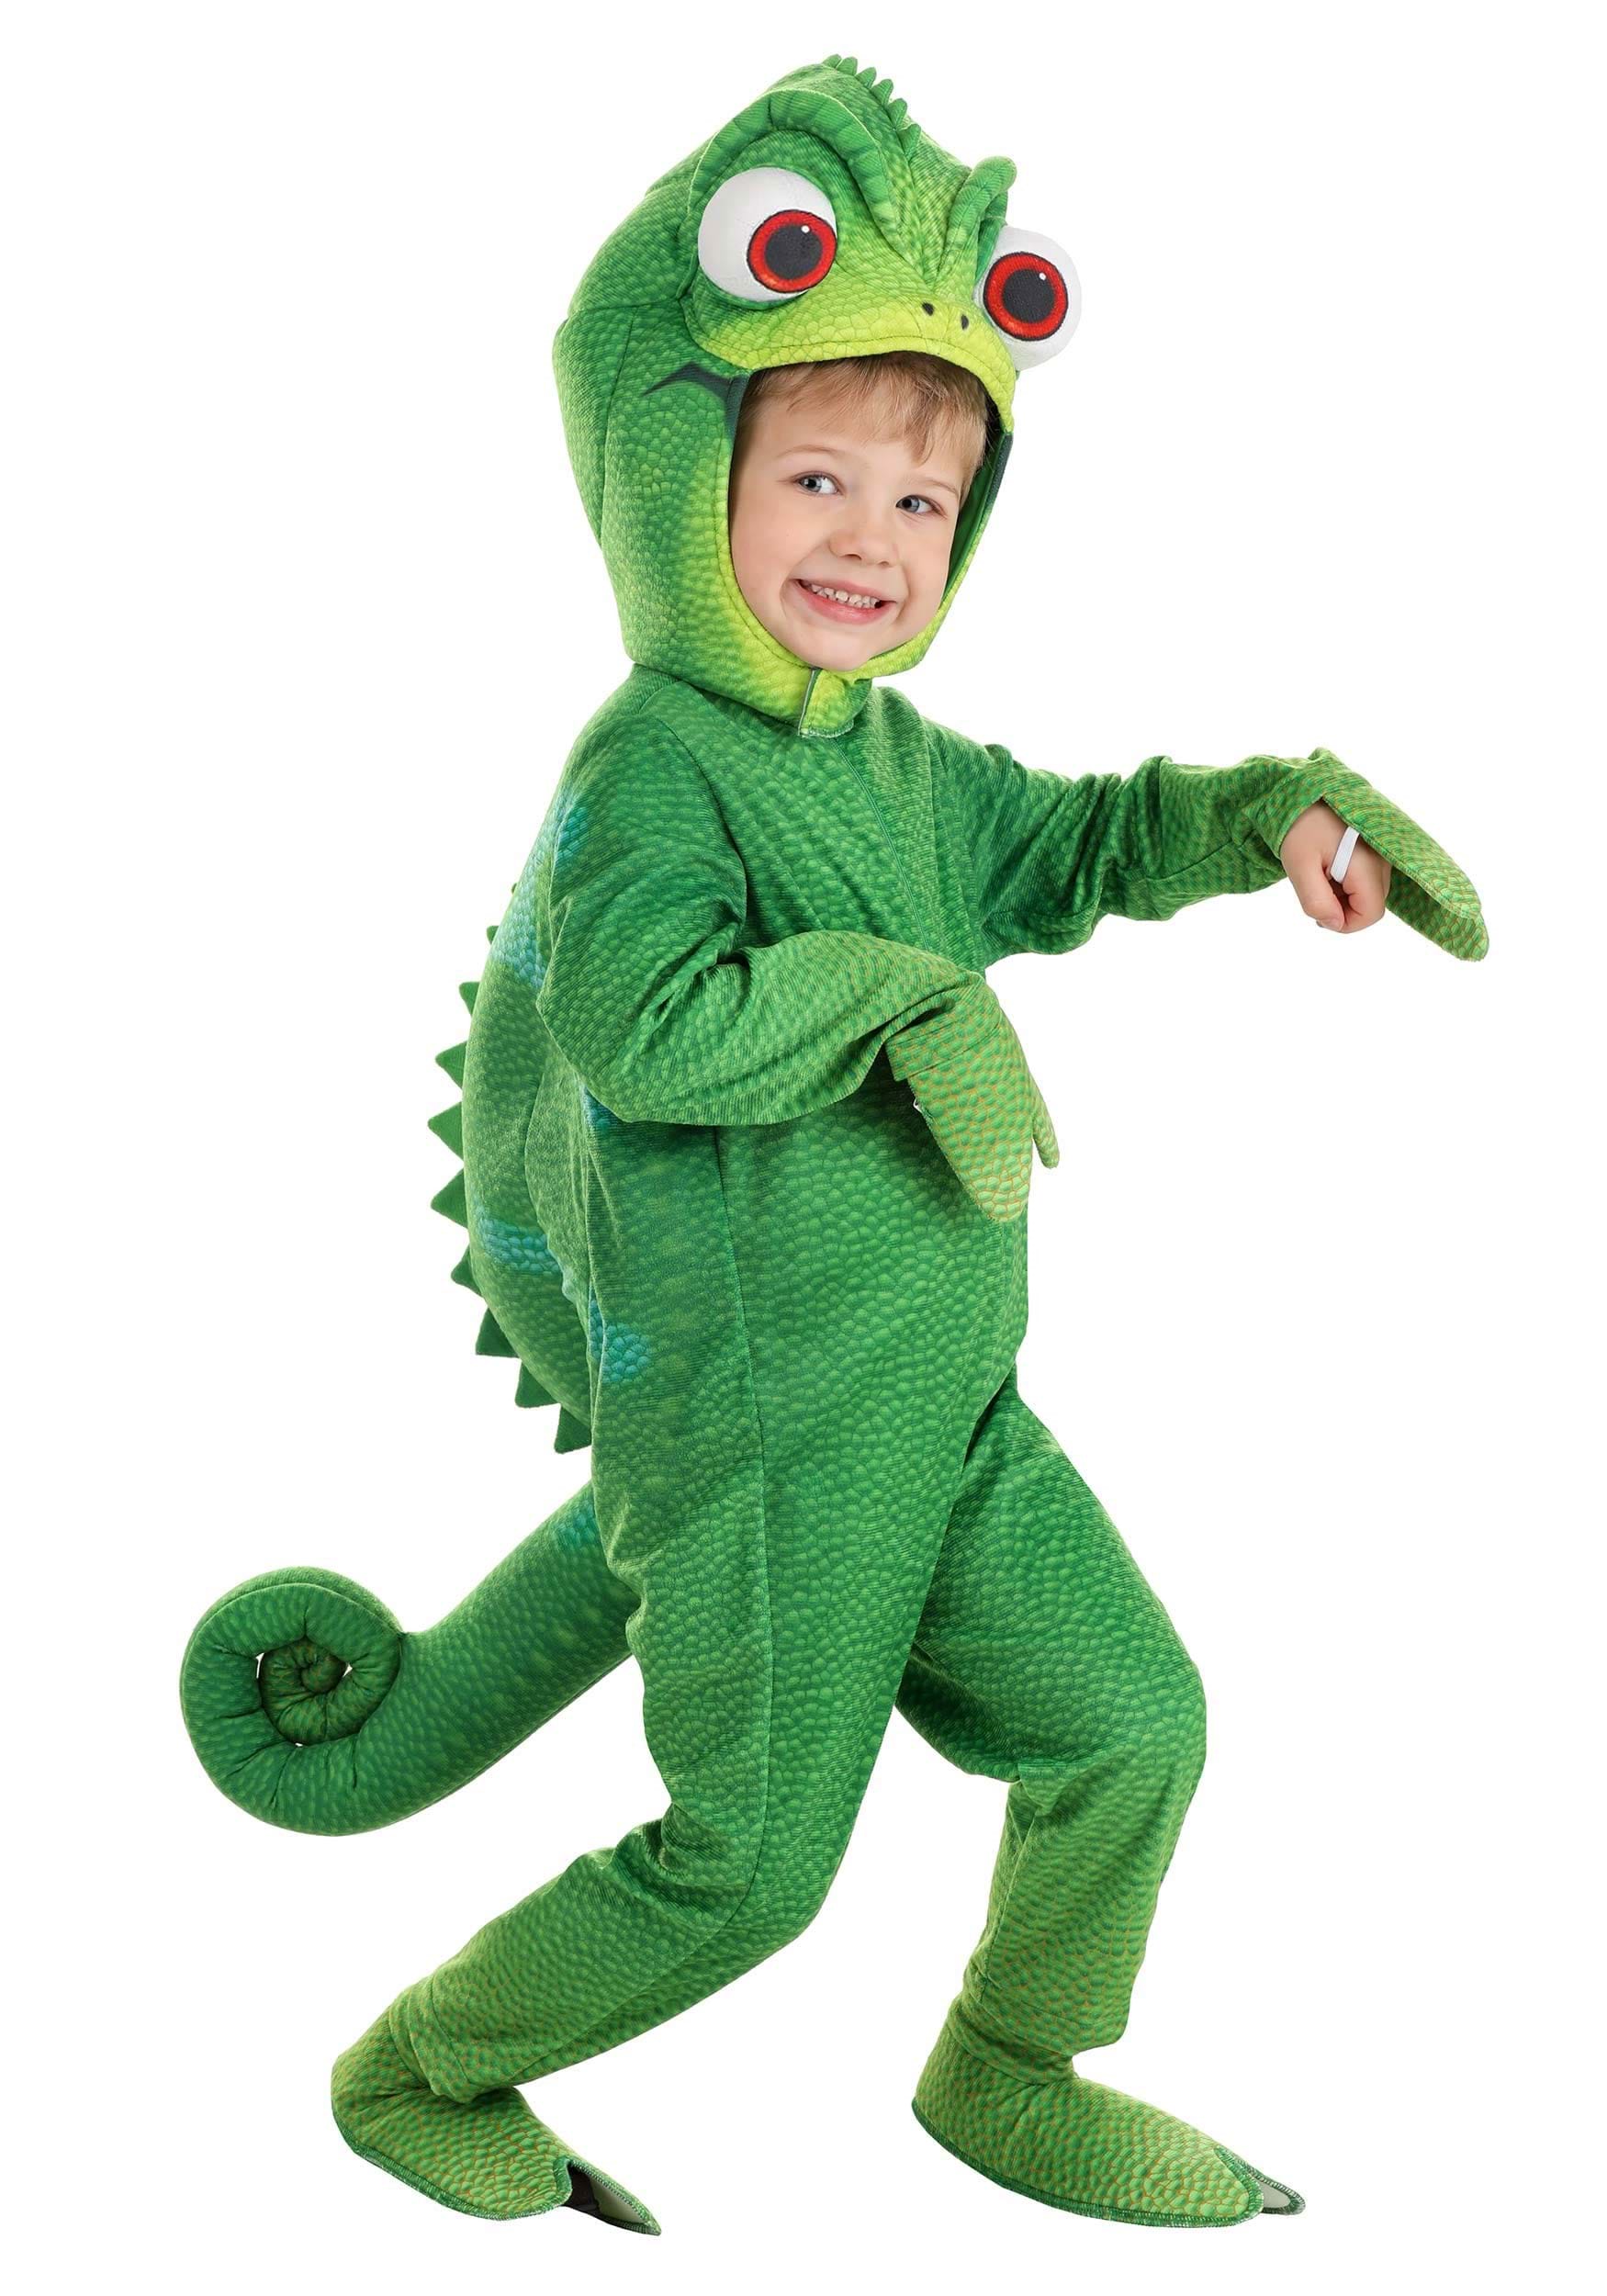 Photos - Fancy Dress FUN Costumes Pascal Tangled Costume for Toddlers Green/White FUN1902TD